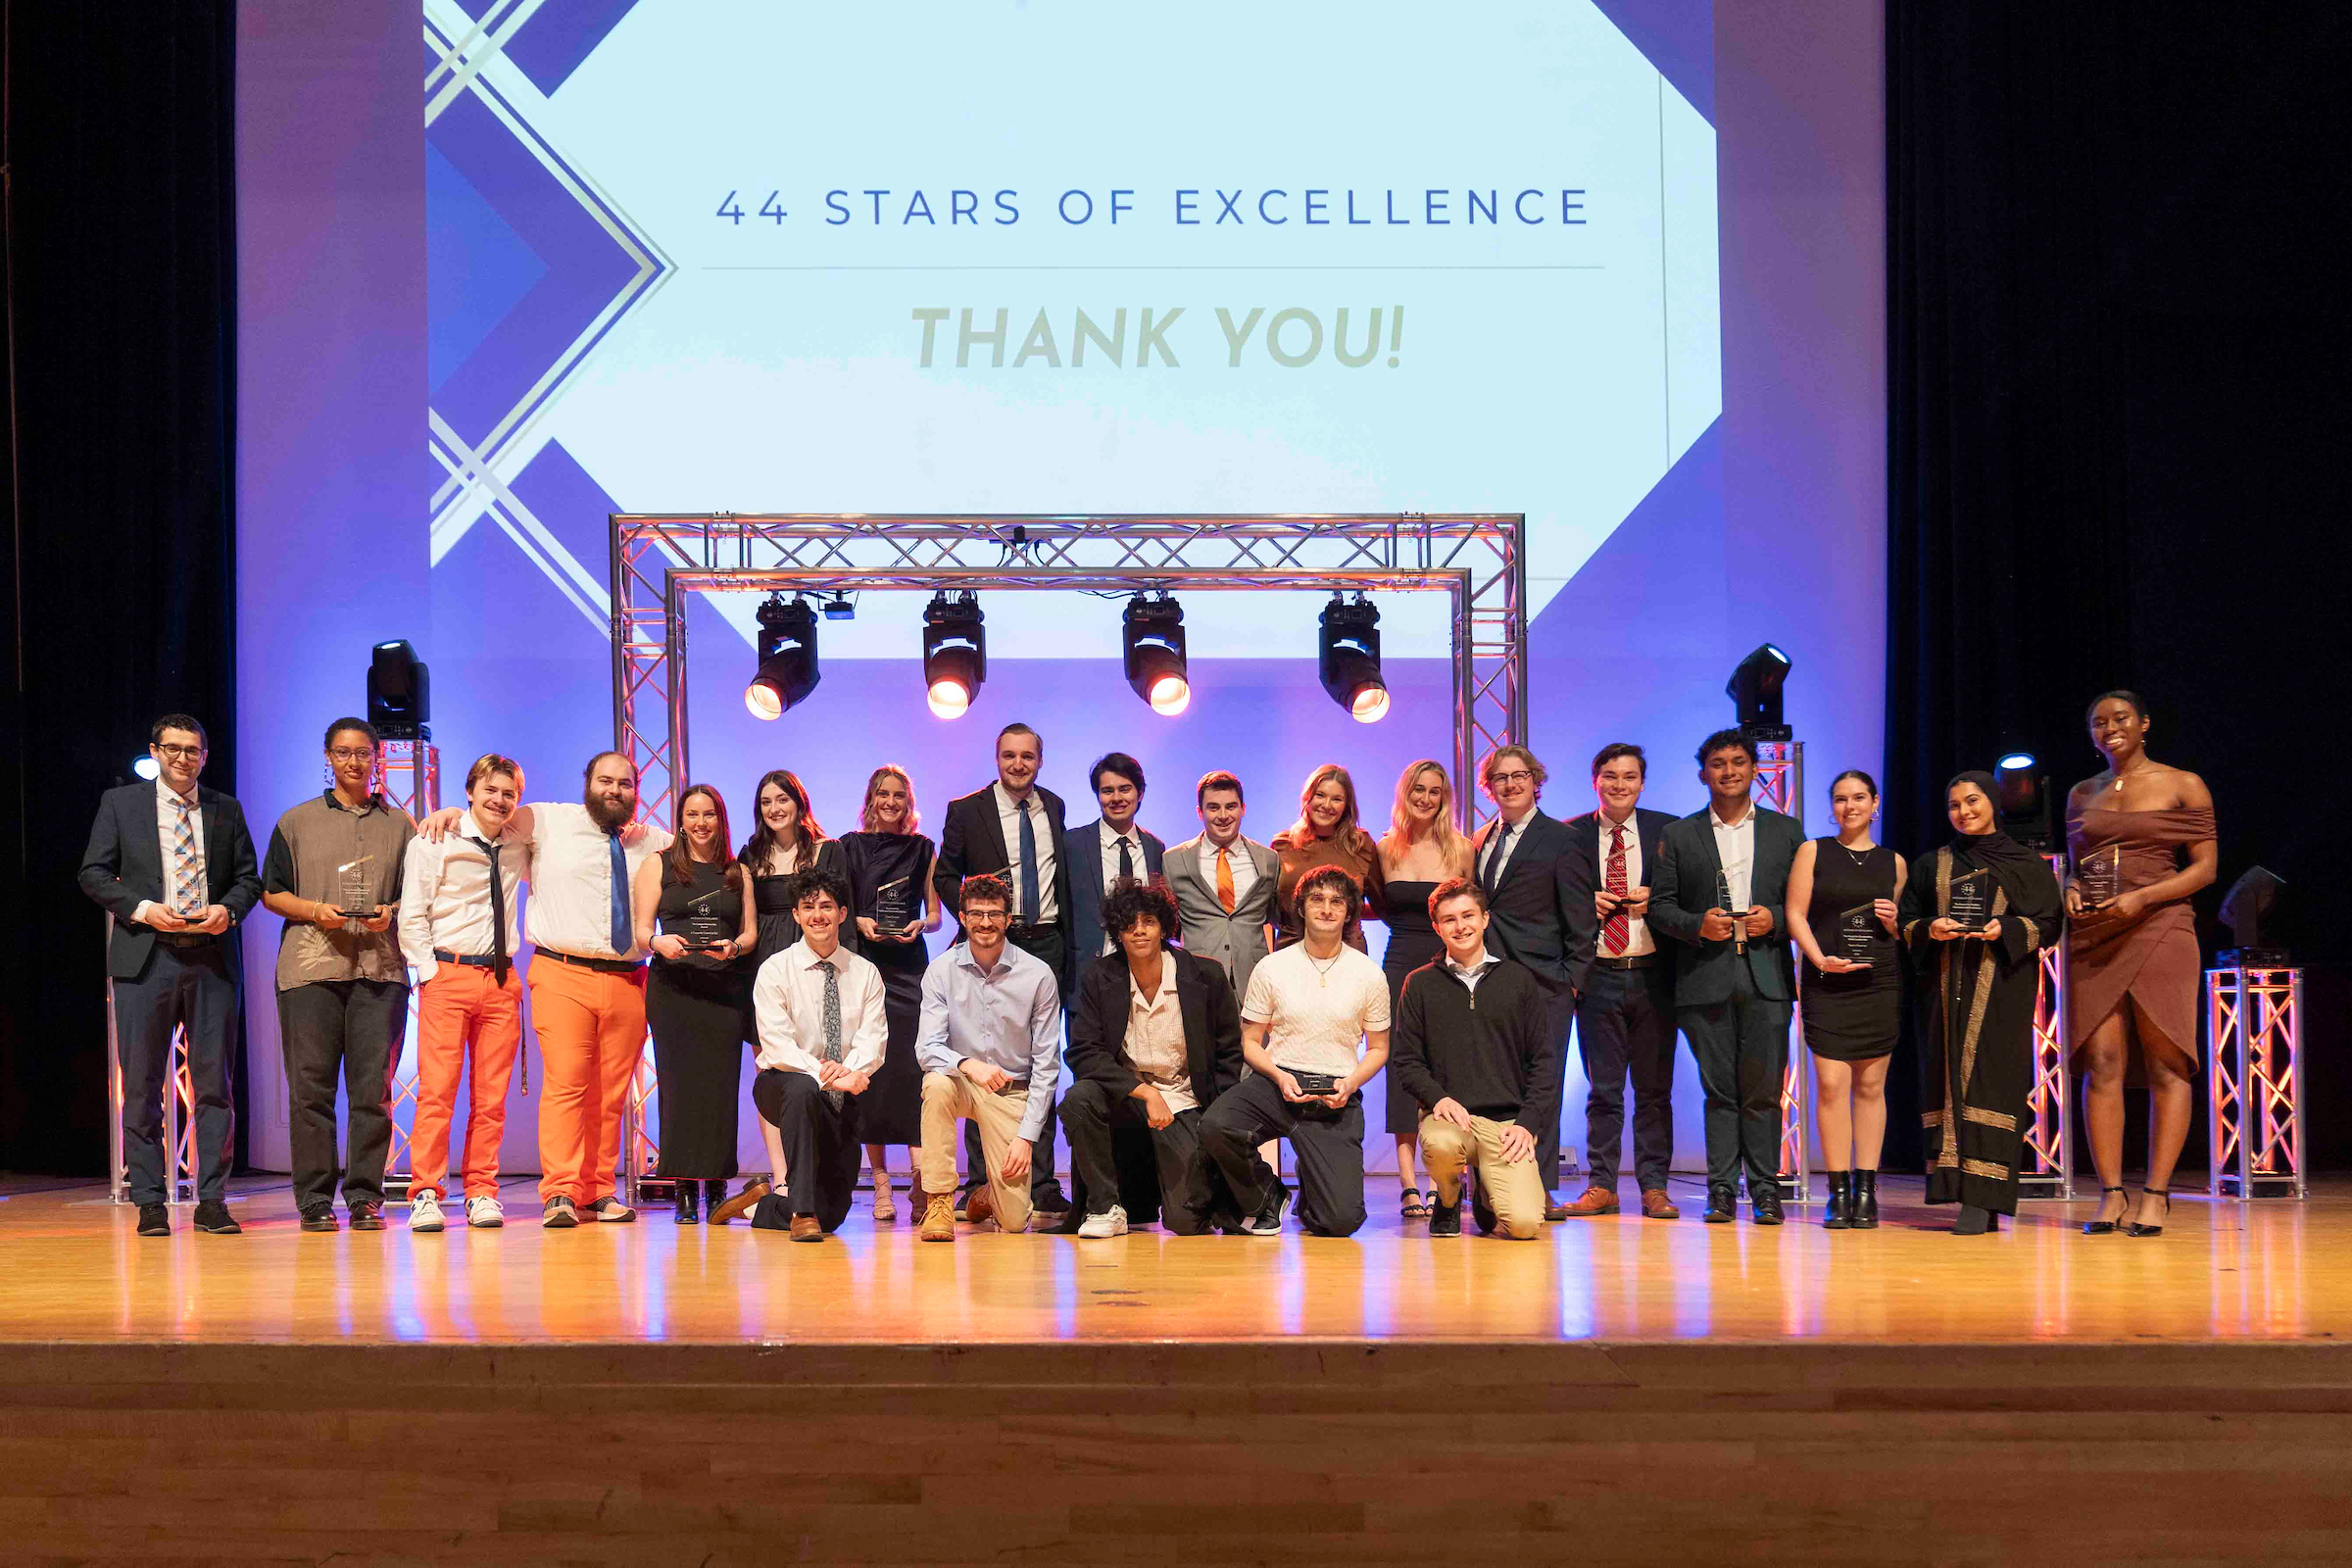 People standing on stage, some with awards, in front of a screen that says 44 Stars of Excellence, Thank you!